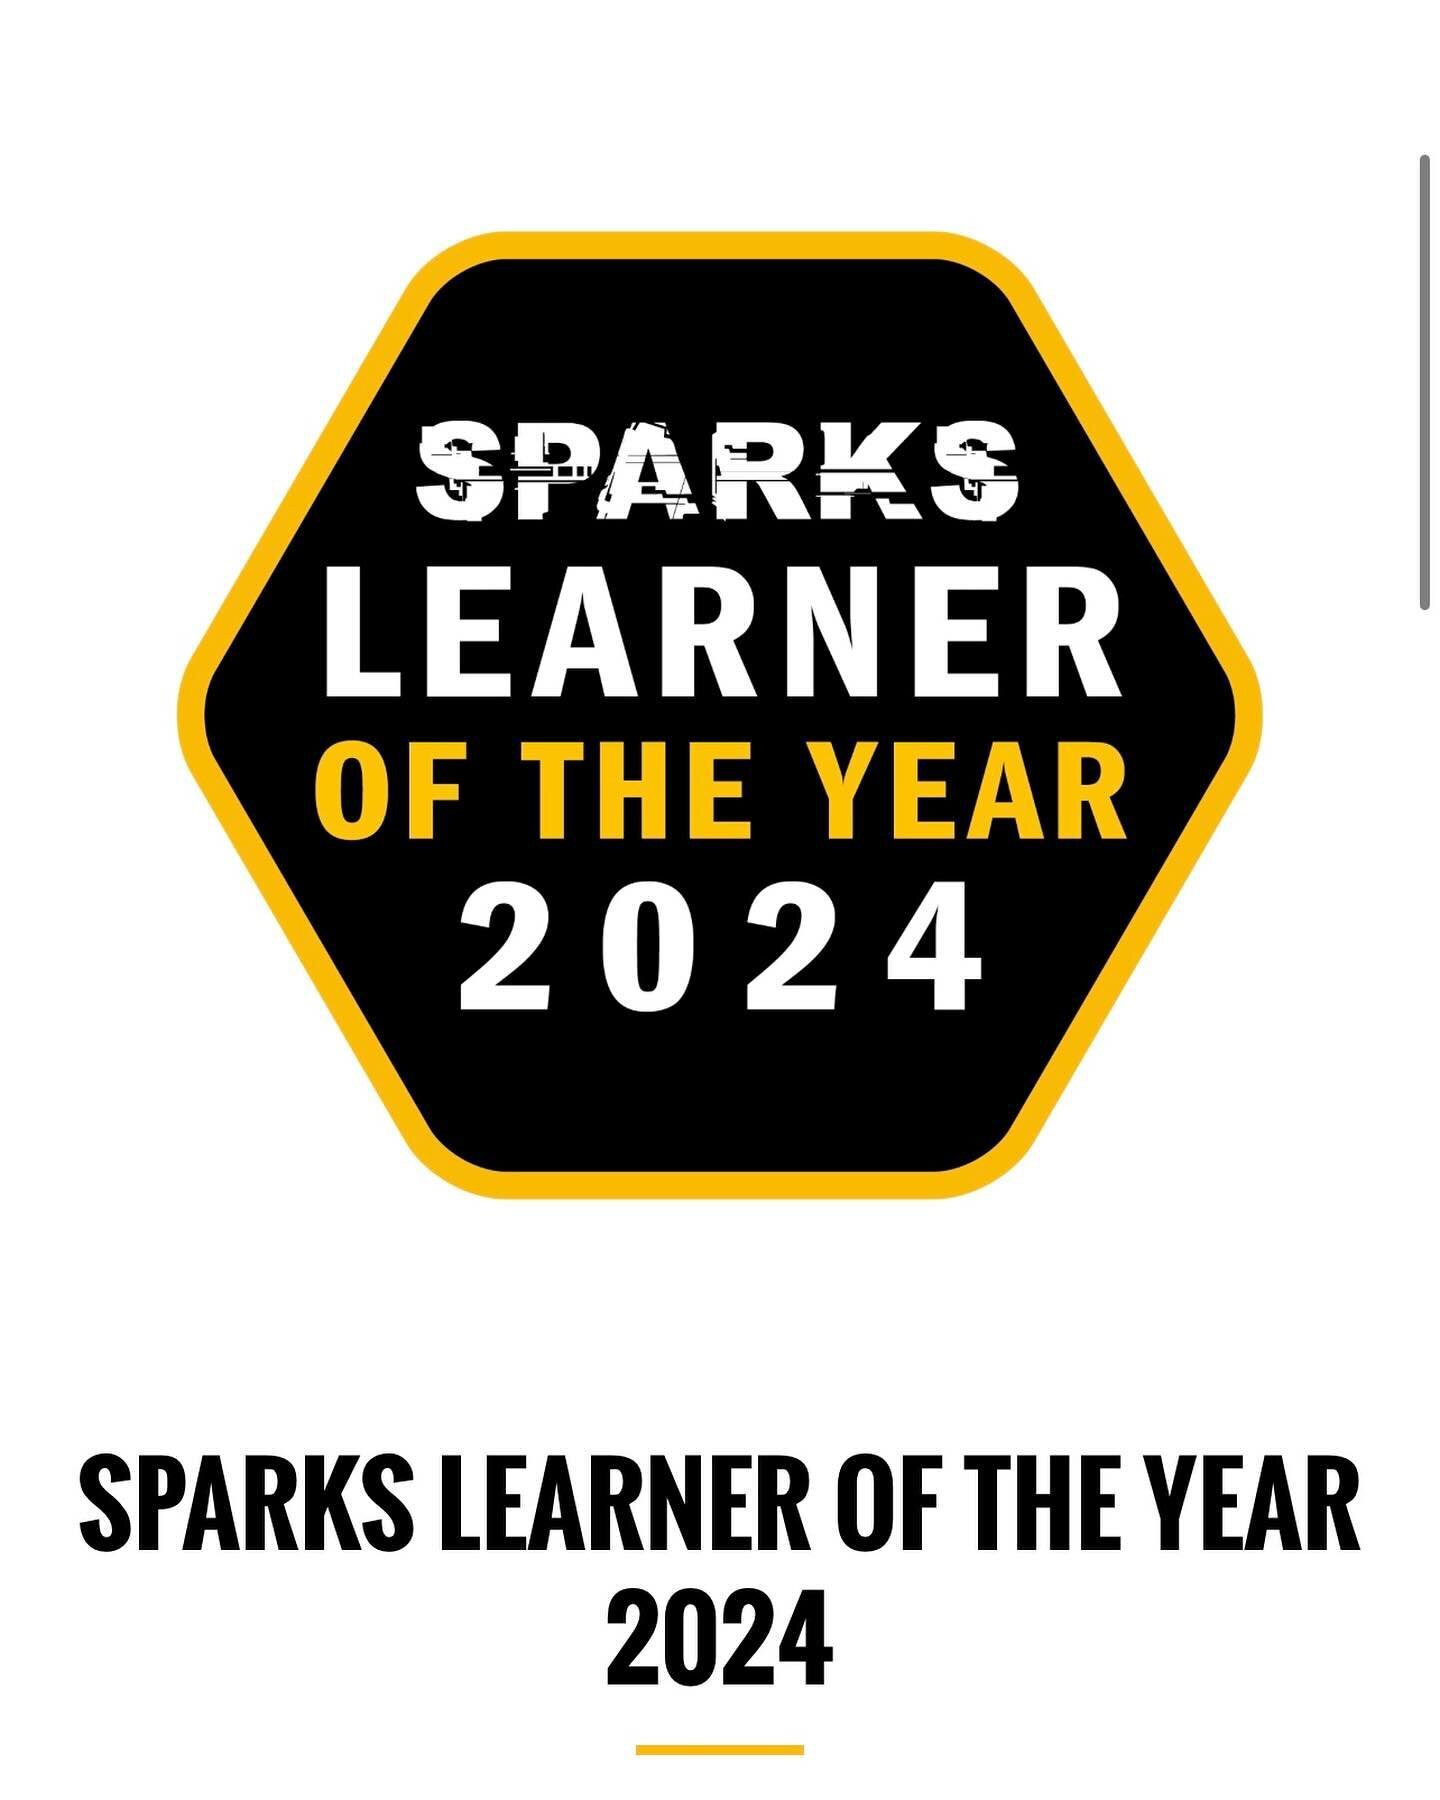 Congratulations to our apprentice Kian for coming first in the South East Regional @sparksmagazineuk Learner Of The Year Award! 👏🏽 

Next stop the National Final 🥳 

Super proud of the electrician you are becoming! Keep up the hard work mate and y